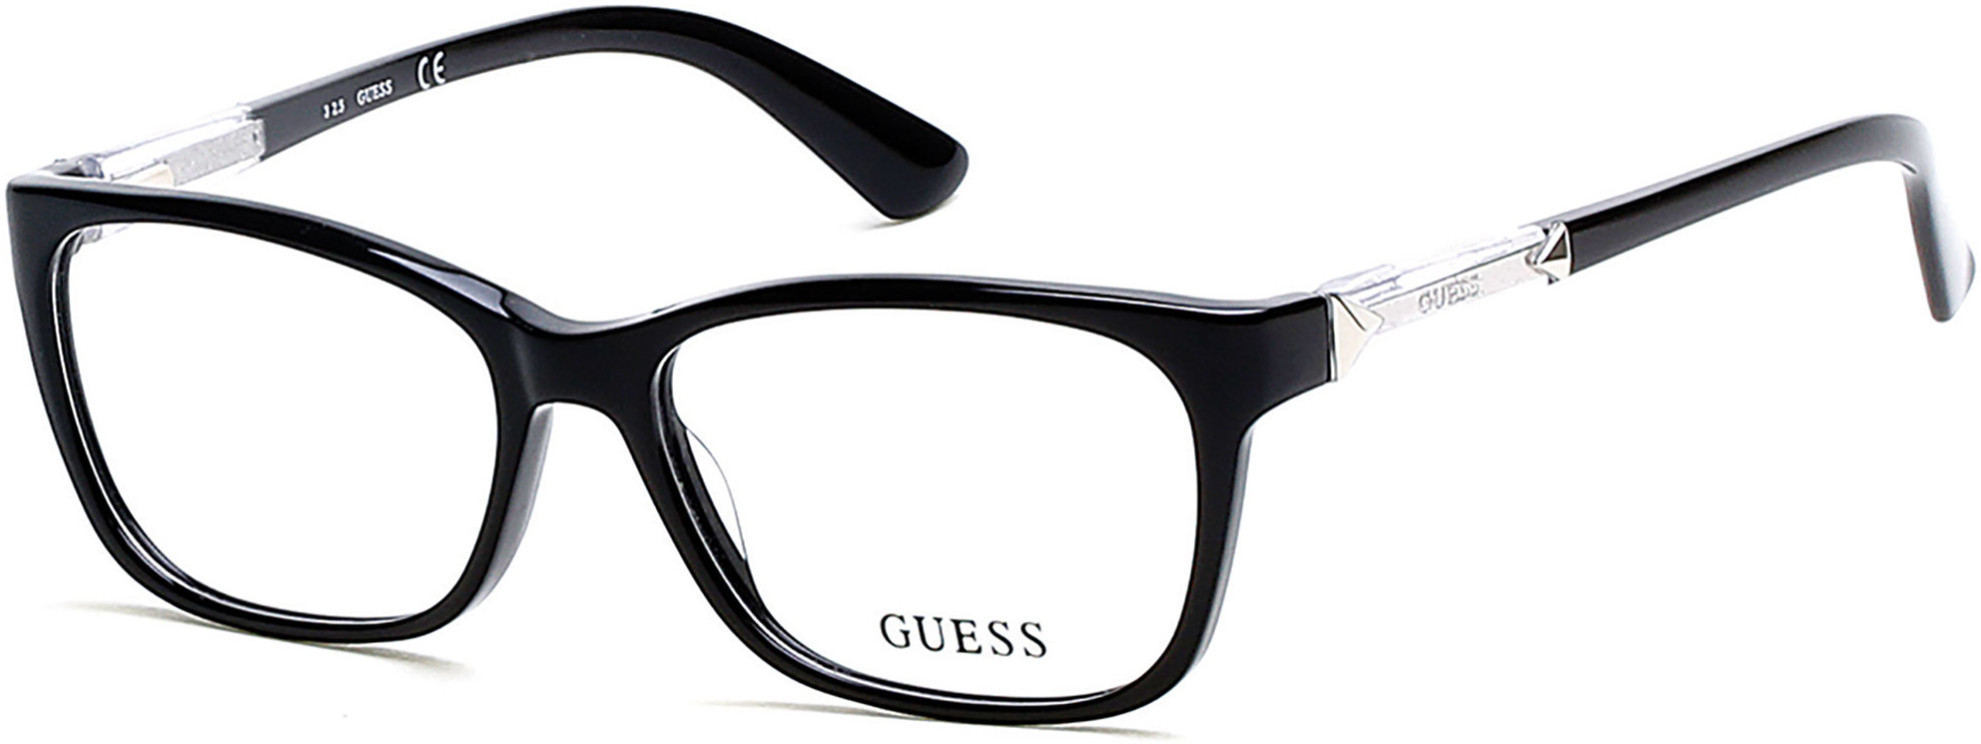 GUESS 2561 001